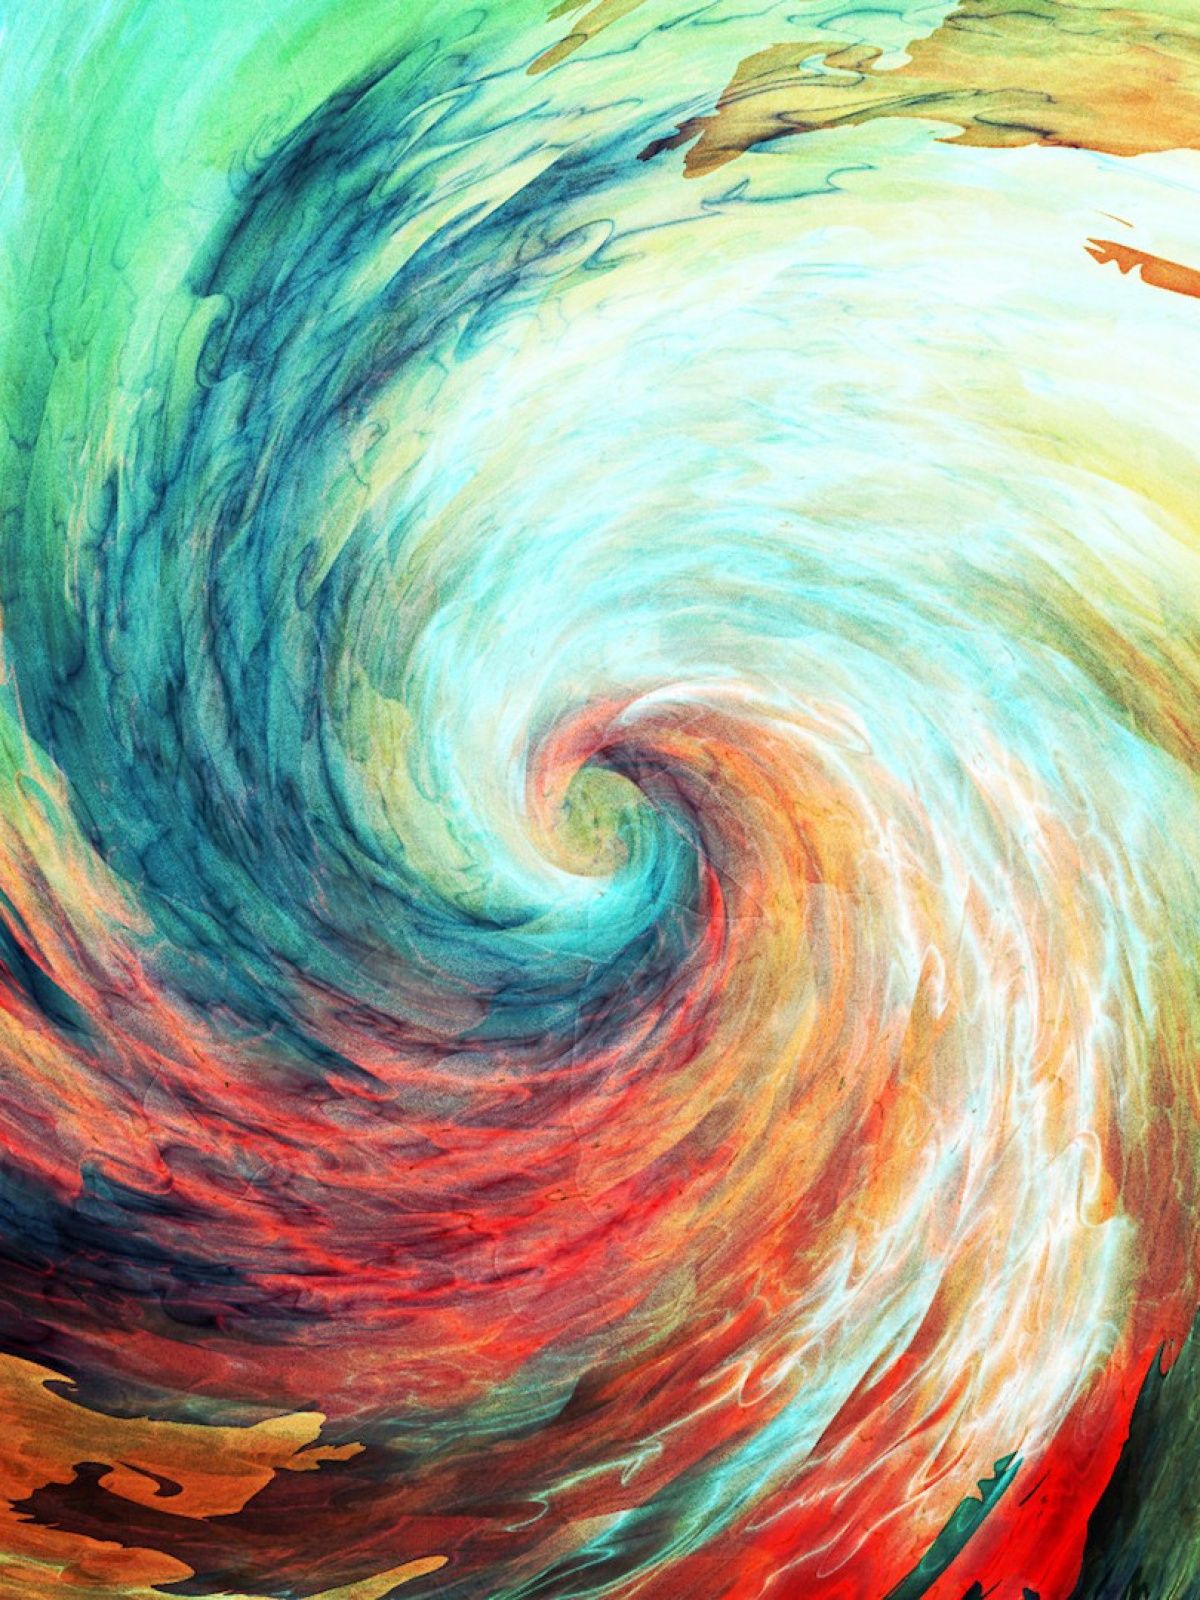 Colorful Spiral Watercolor Android Wallpaper free download